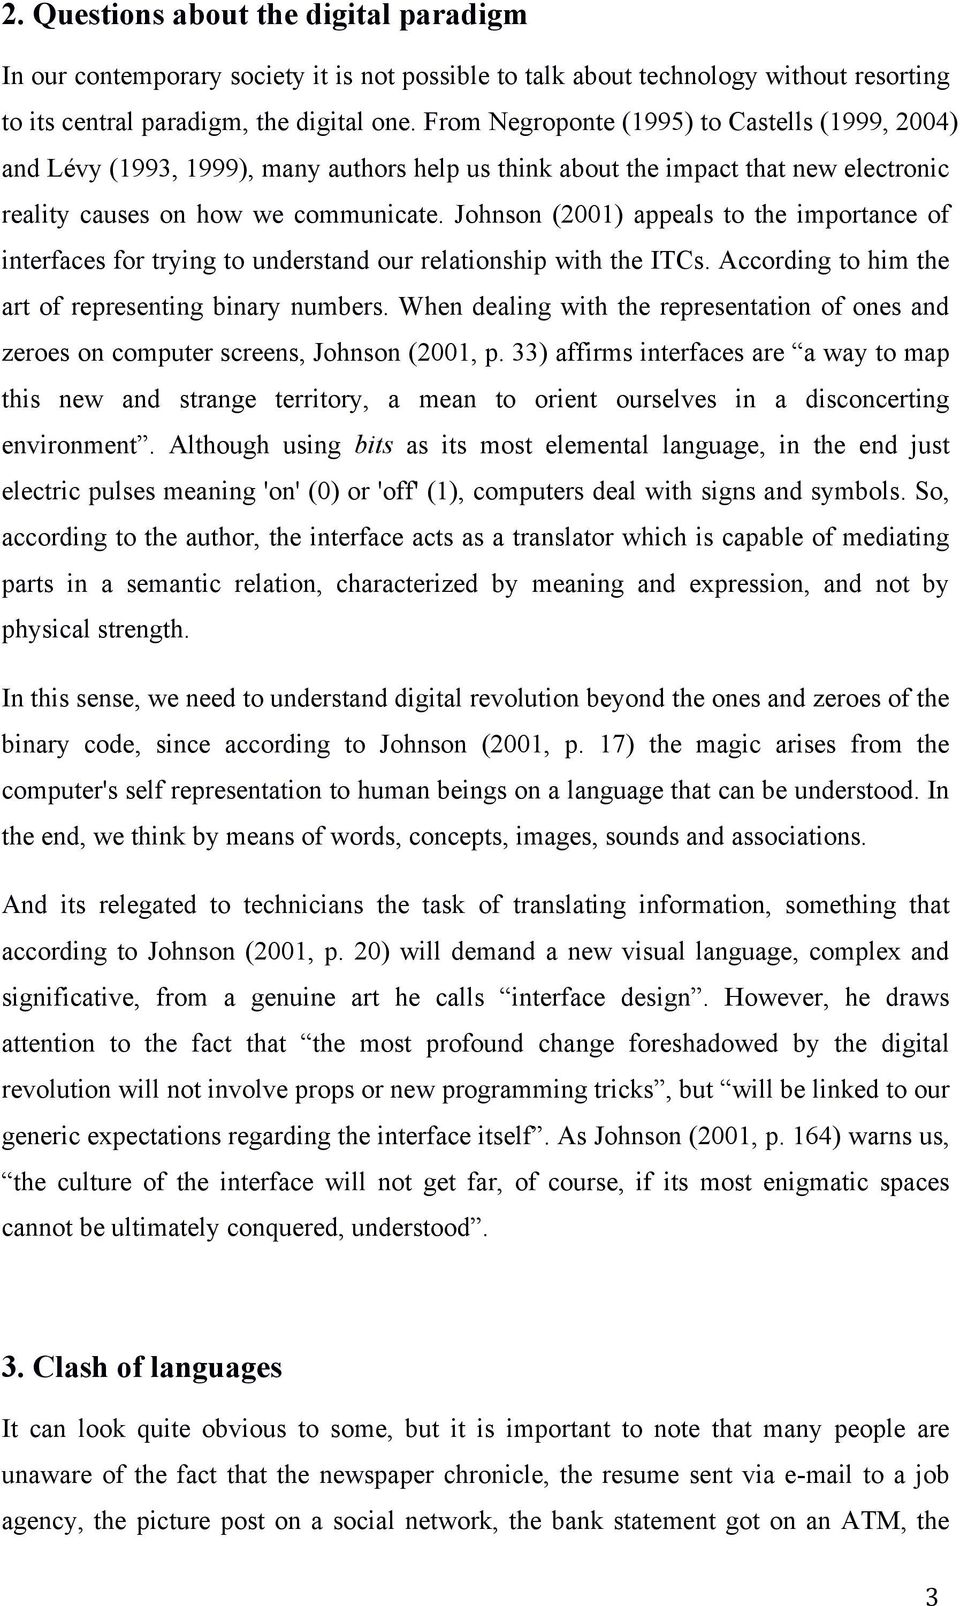 Johnson (2001) appeals to the importance of interfaces for trying to understand our relationship with the ITCs. According to him the art of representing binary numbers.